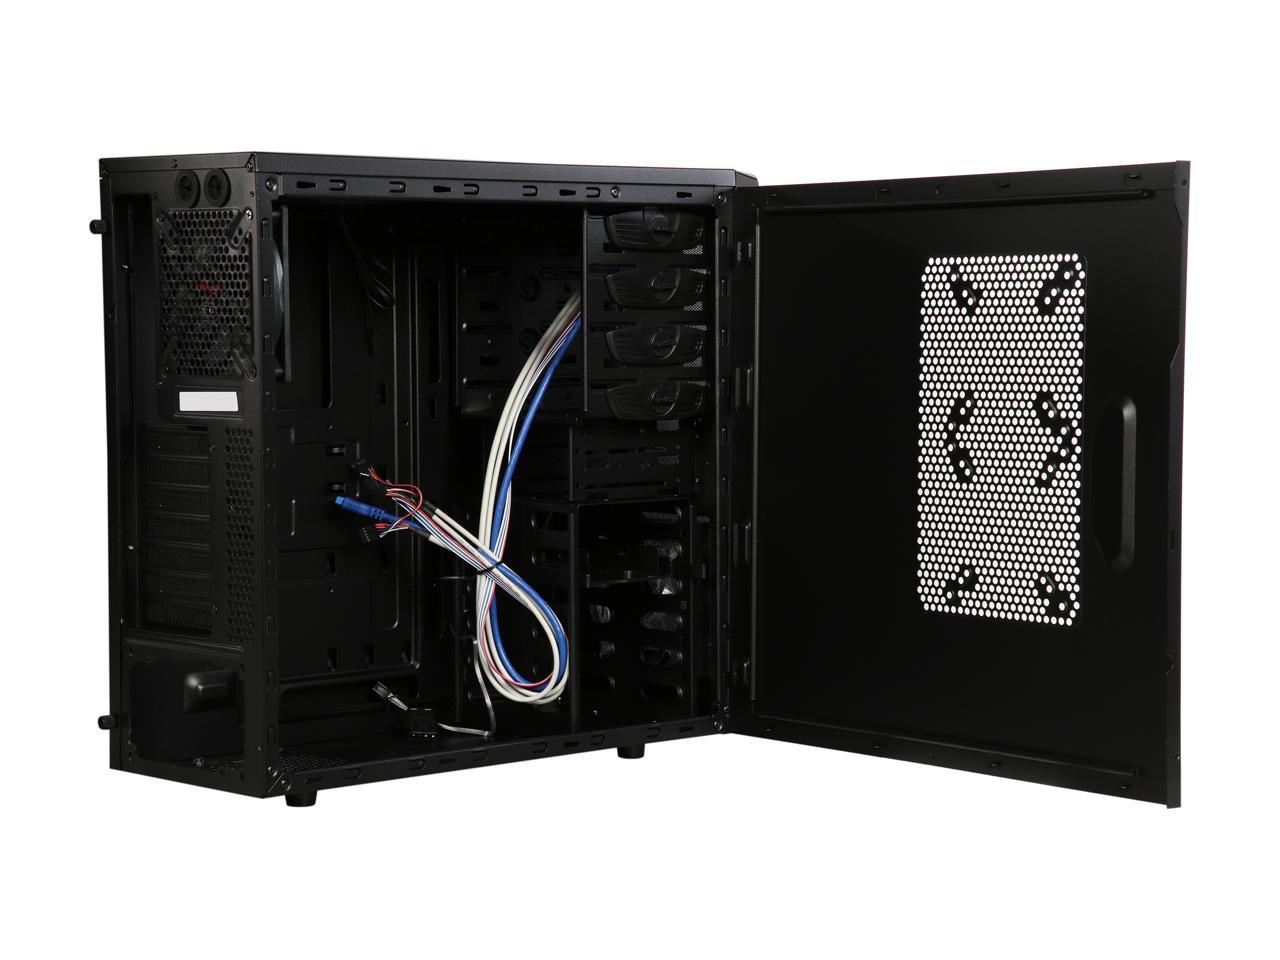 Rosewill Black Gaming ATX Mid Tower Computer Case, Three Included Fans, 1 x Front Blue LED 120mm Fan, 1 x Top 140mm Fan, 1 x Rear 120mm Fan, Two More Optional Side 120mm Fans Supported - CHALLENGER